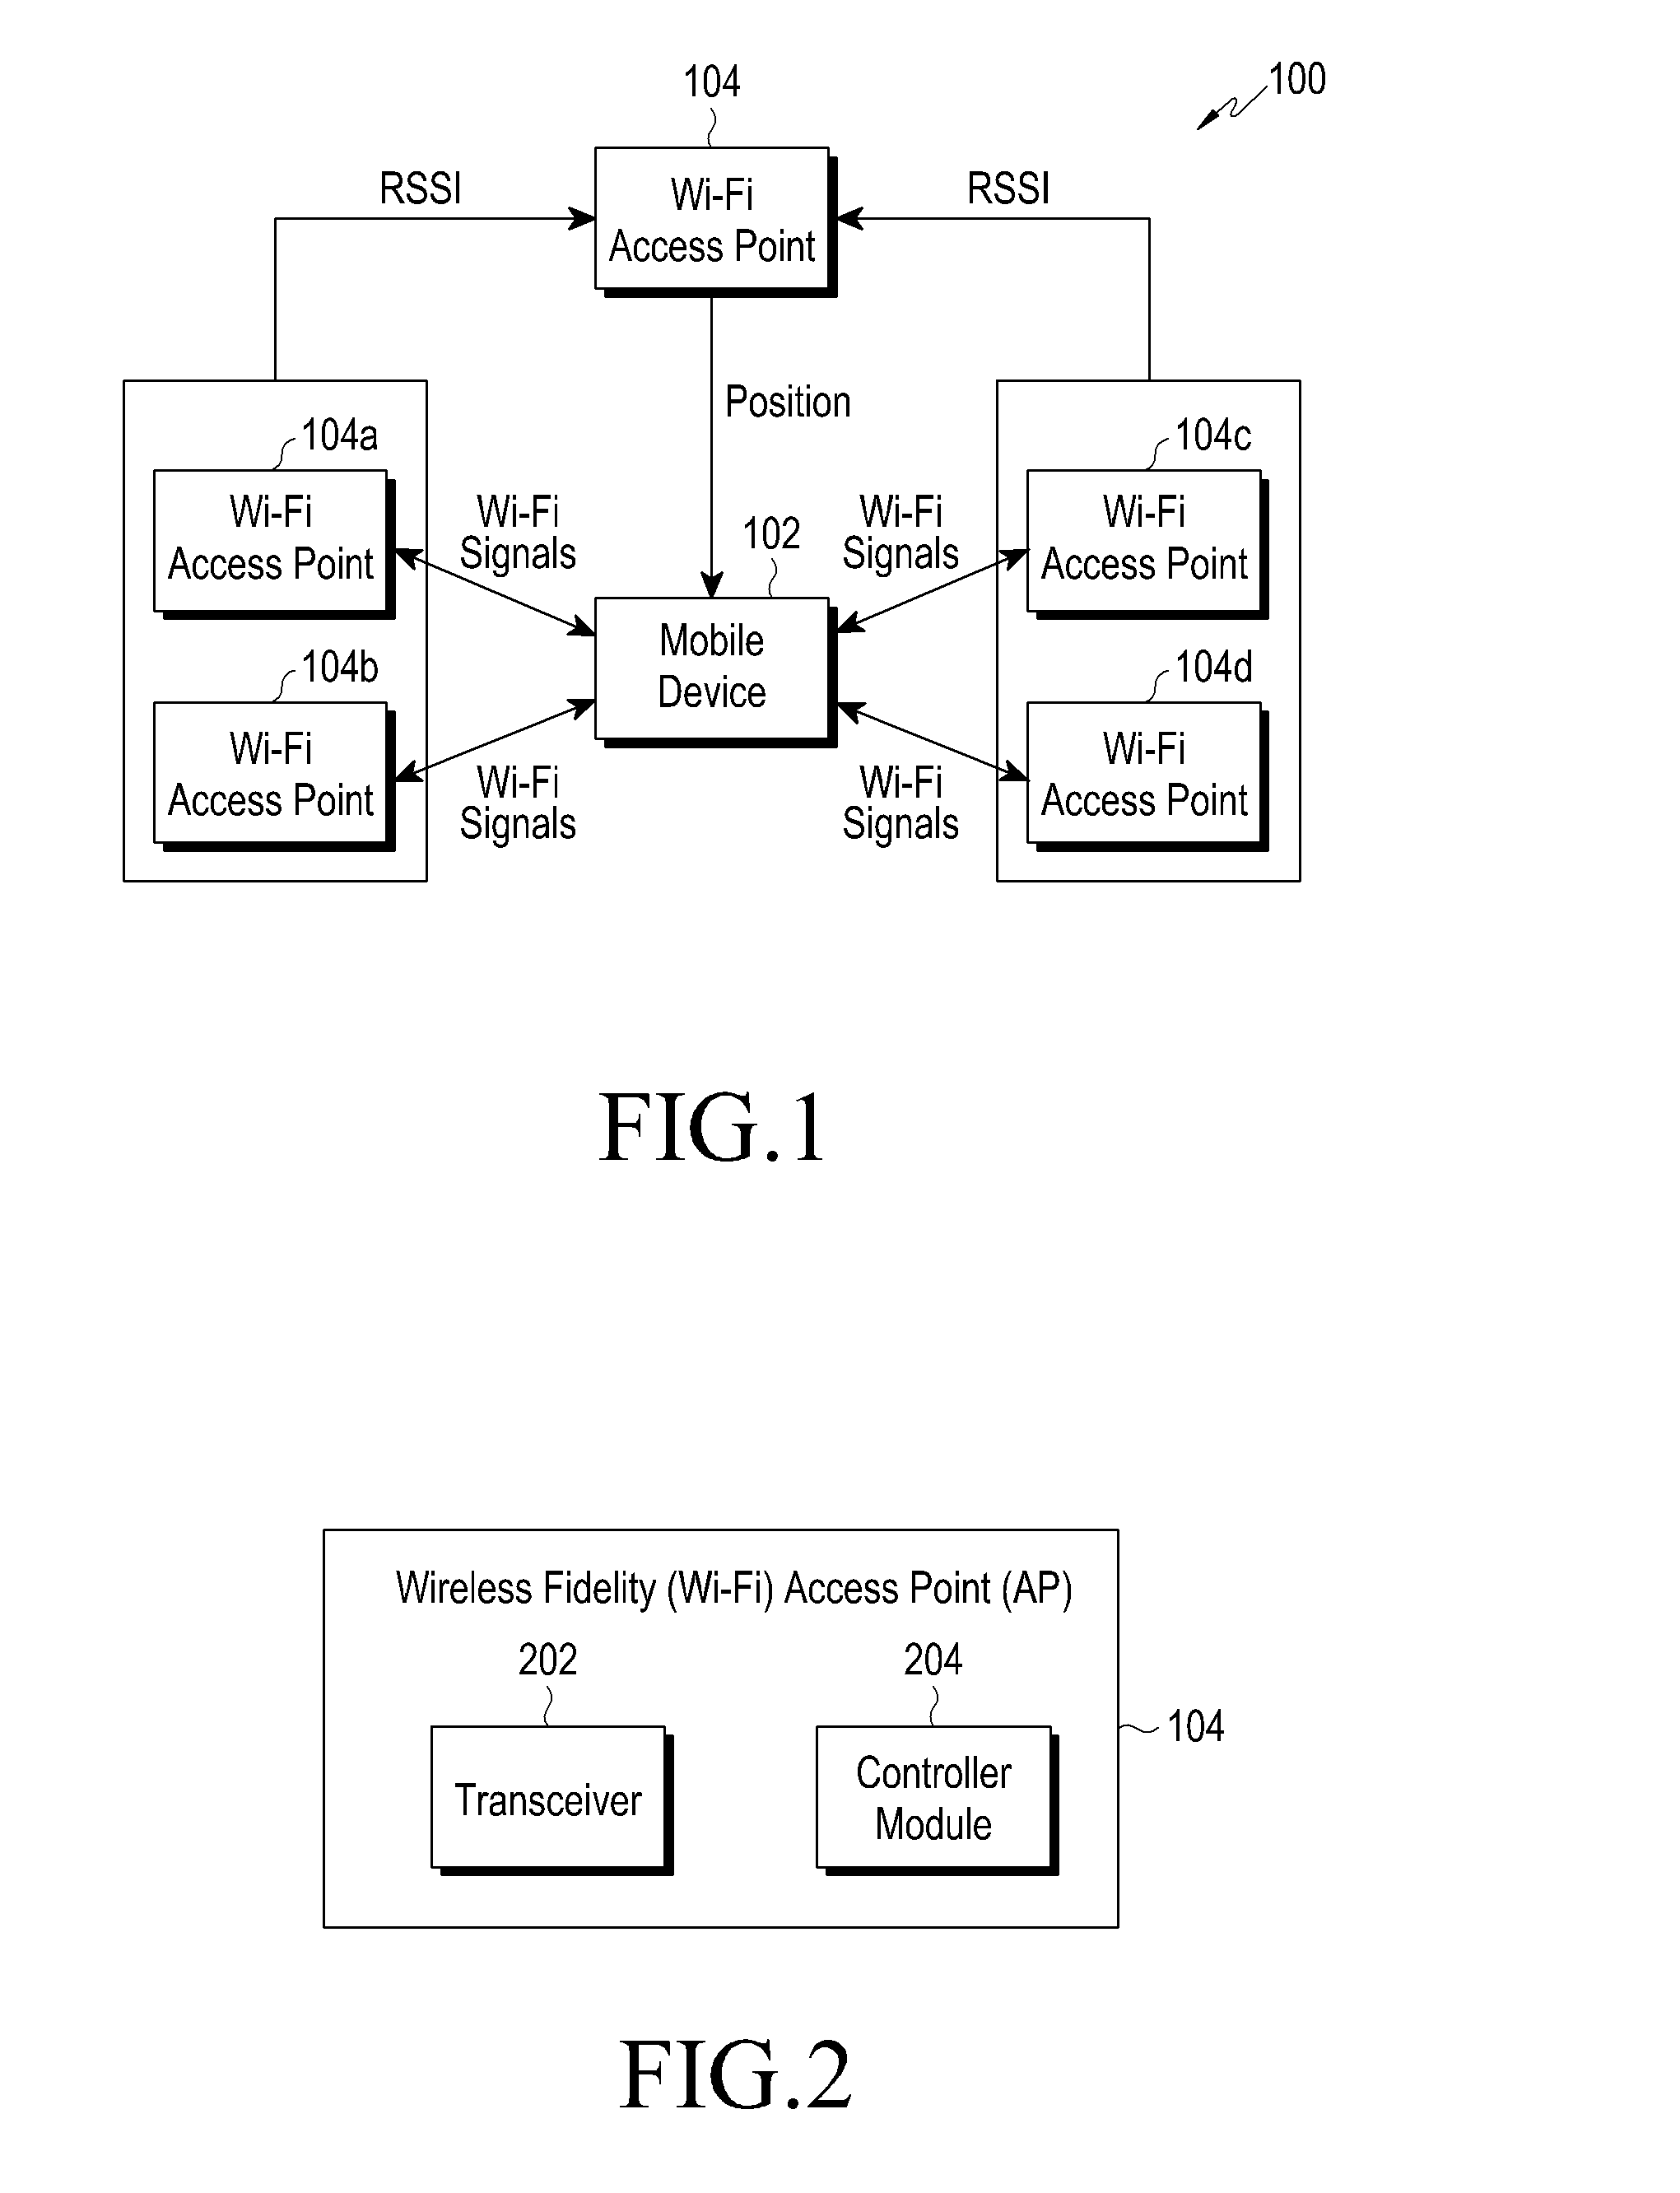 Method and system for determining a position of a mobile device by an access point